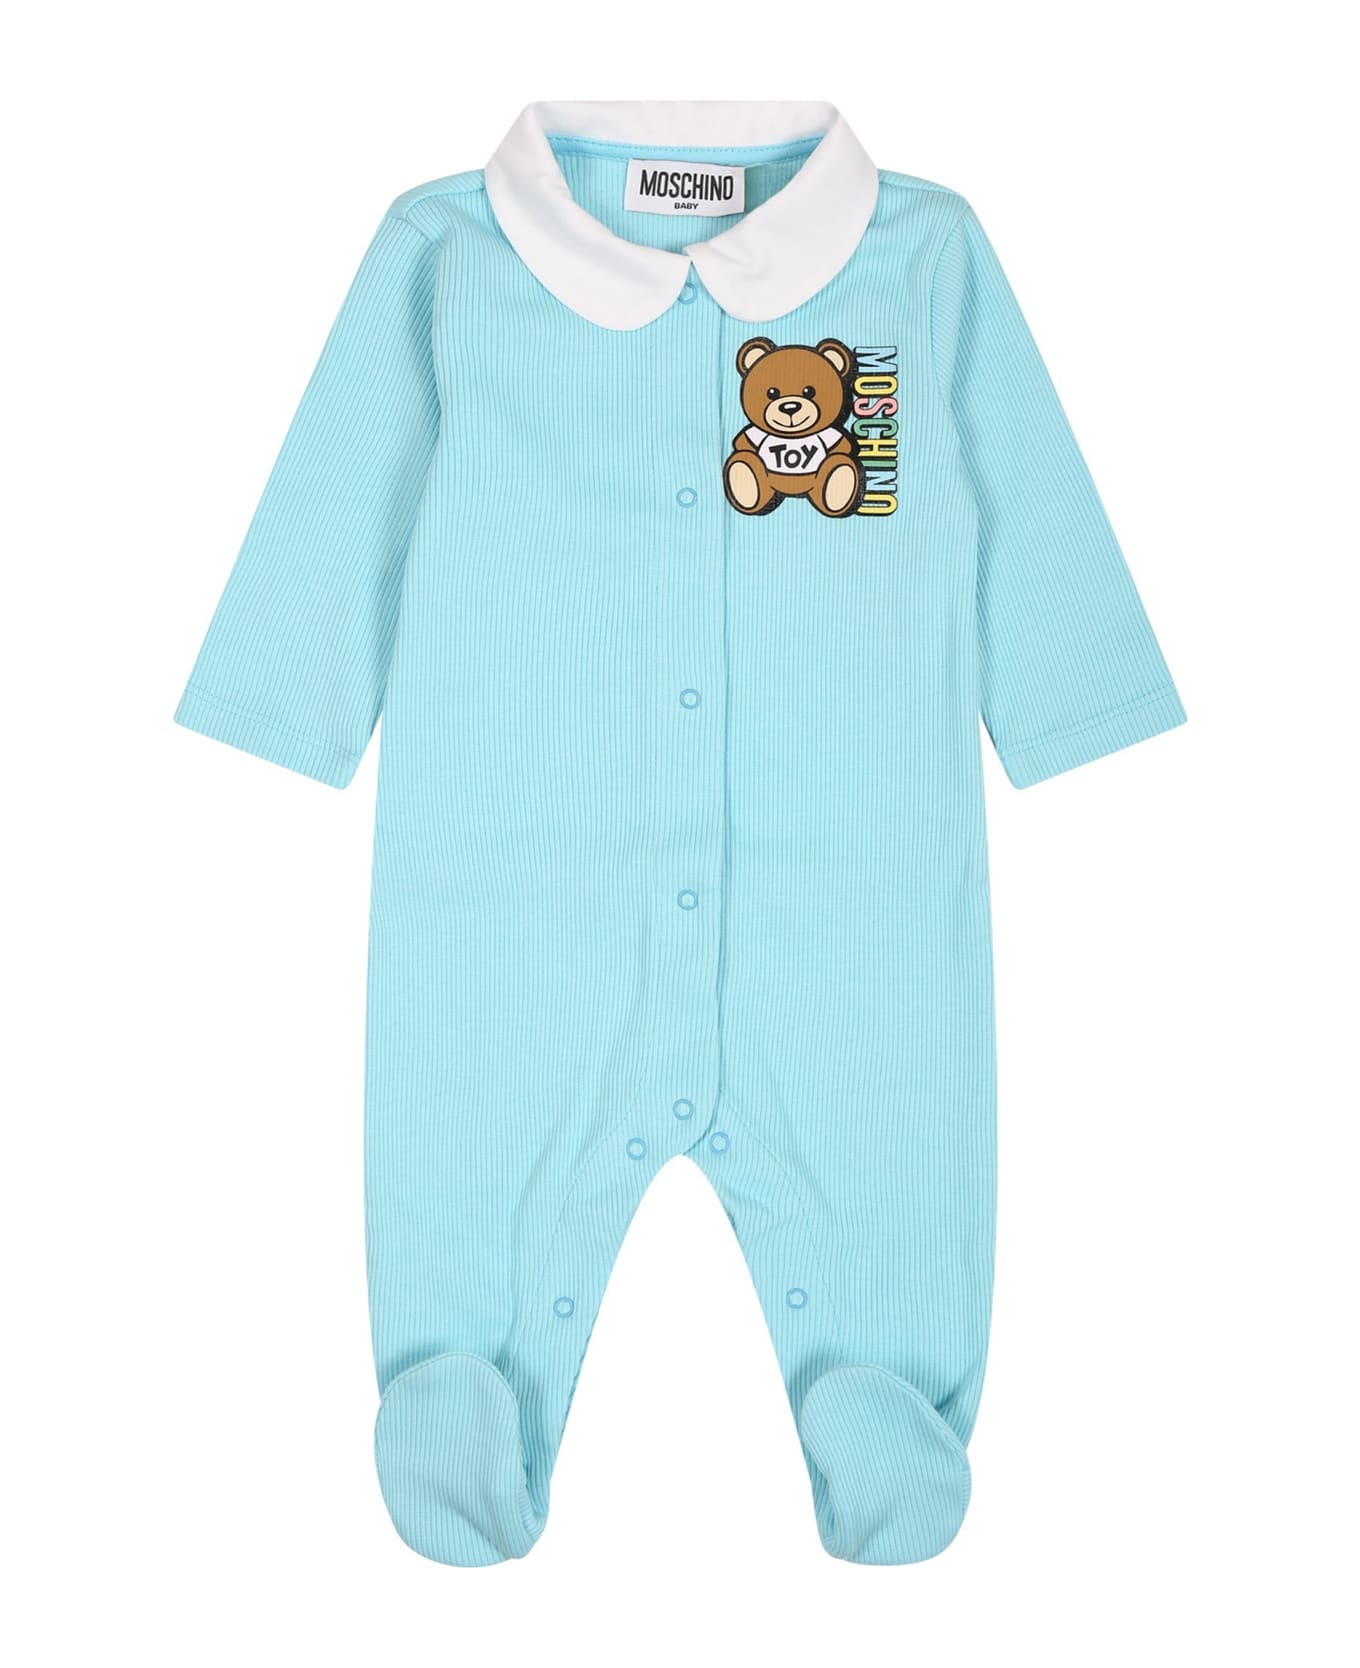 Moschino Light Blue Babygrow For Baby Boy With Teddy Bear And Logo - Light Blue ボディスーツ＆セットアップ